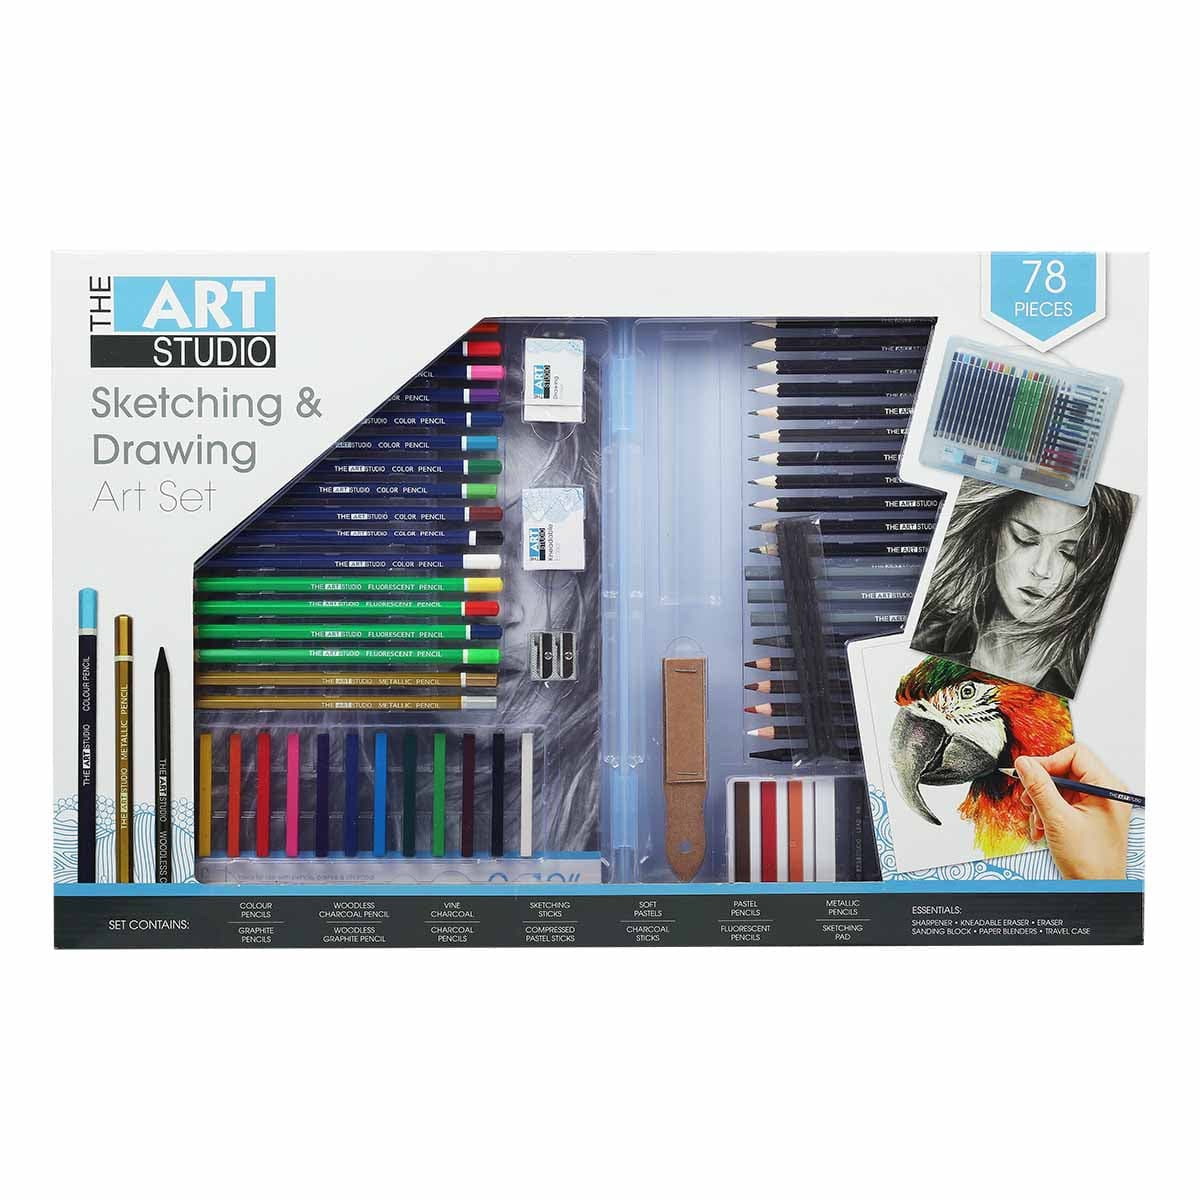 Image of The Art Studio Sketching and Drawing Art Set (78 Pieces)